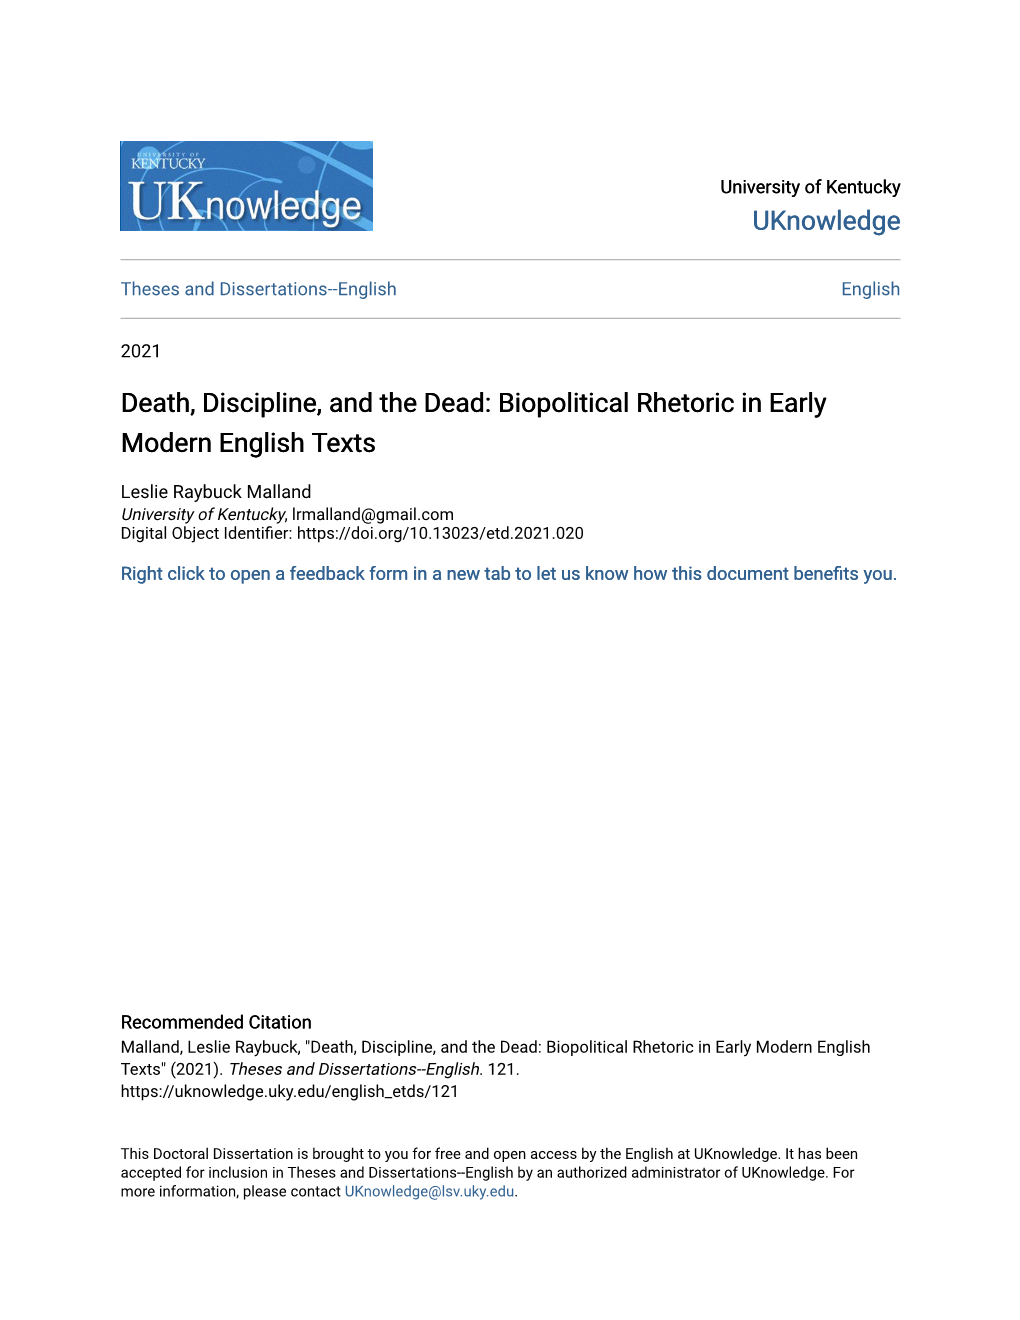 Death, Discipline, and the Dead: Biopolitical Rhetoric in Early Modern English Texts